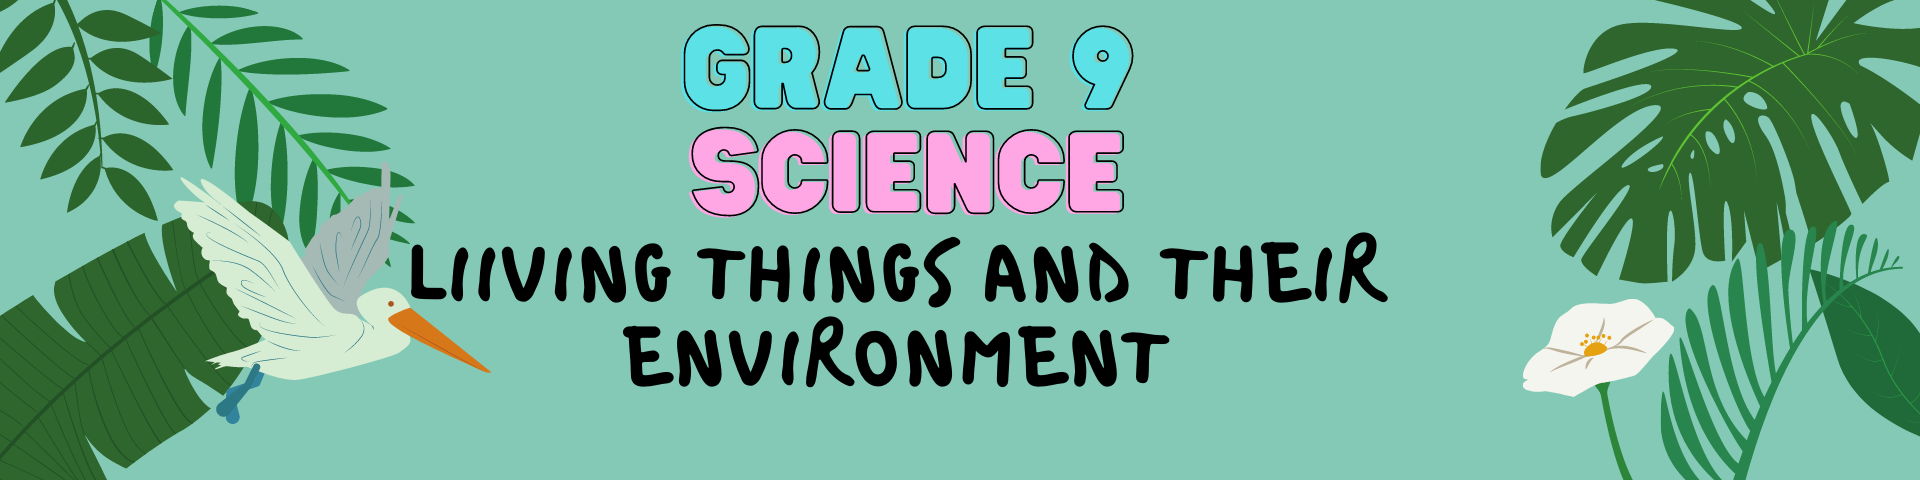 GRADE 9 Living Things and Their Environment